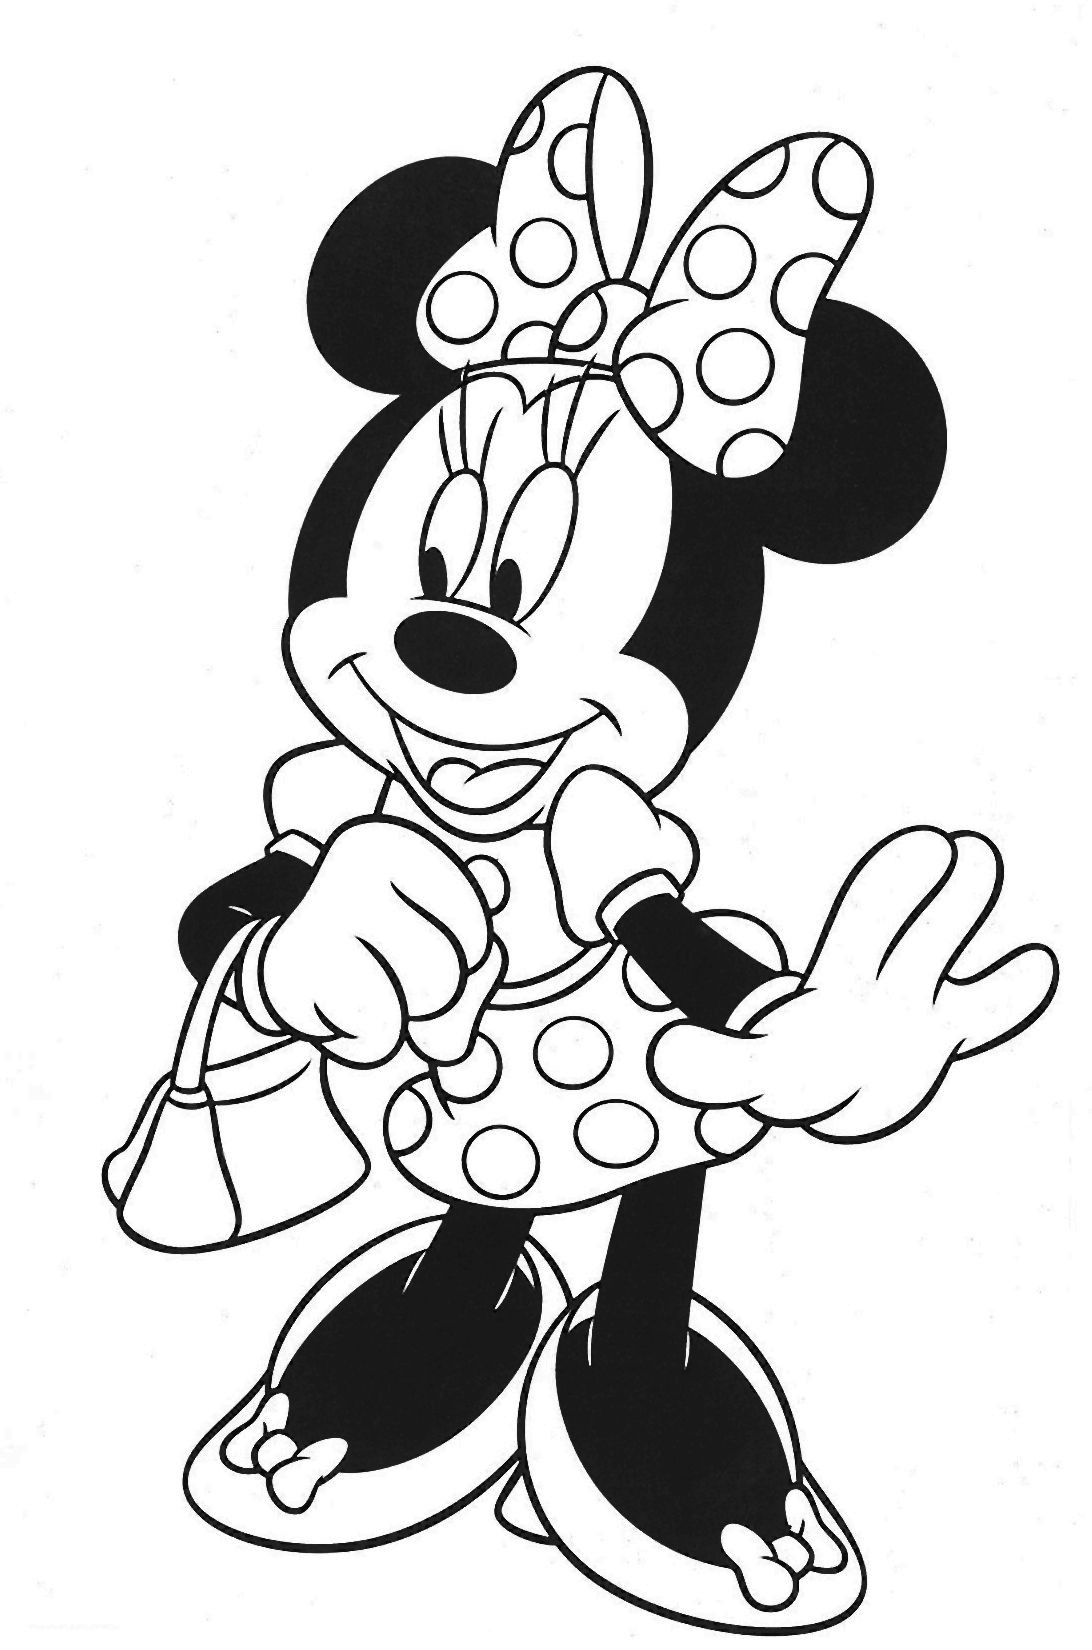 Minnie Mouse Printable Coloring Pages
 Minnie Mouse